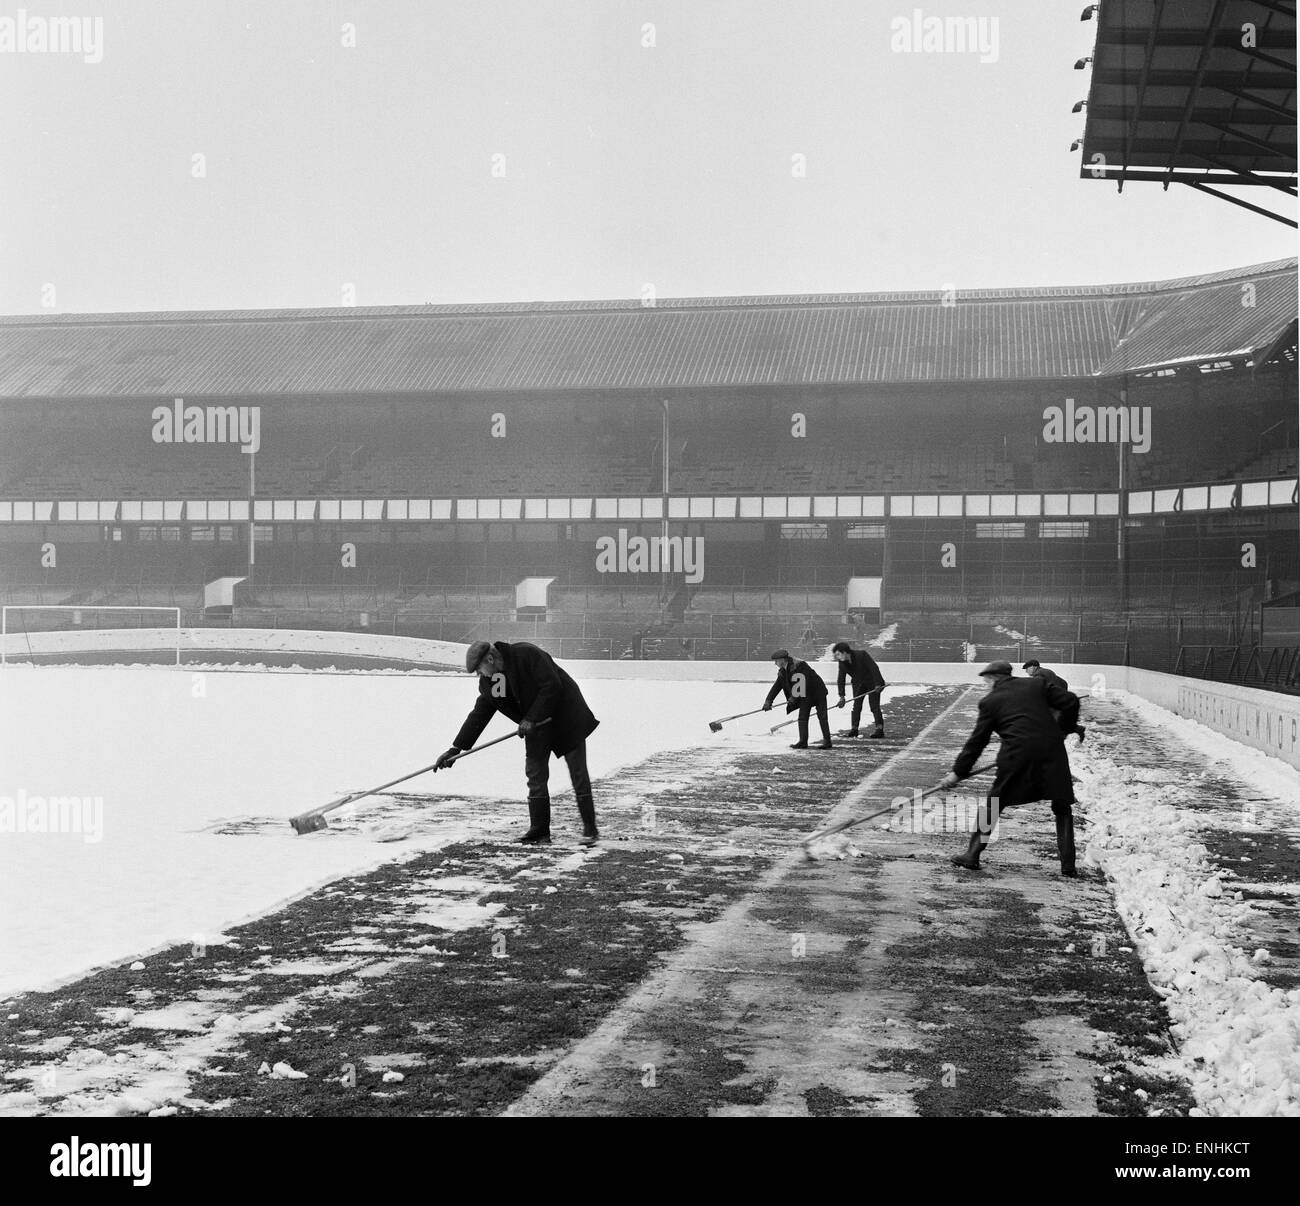 groundsmen-try-to-clear-the-snow-from-the-pitch-at-goodison-park-home-ENHKCT.jpg